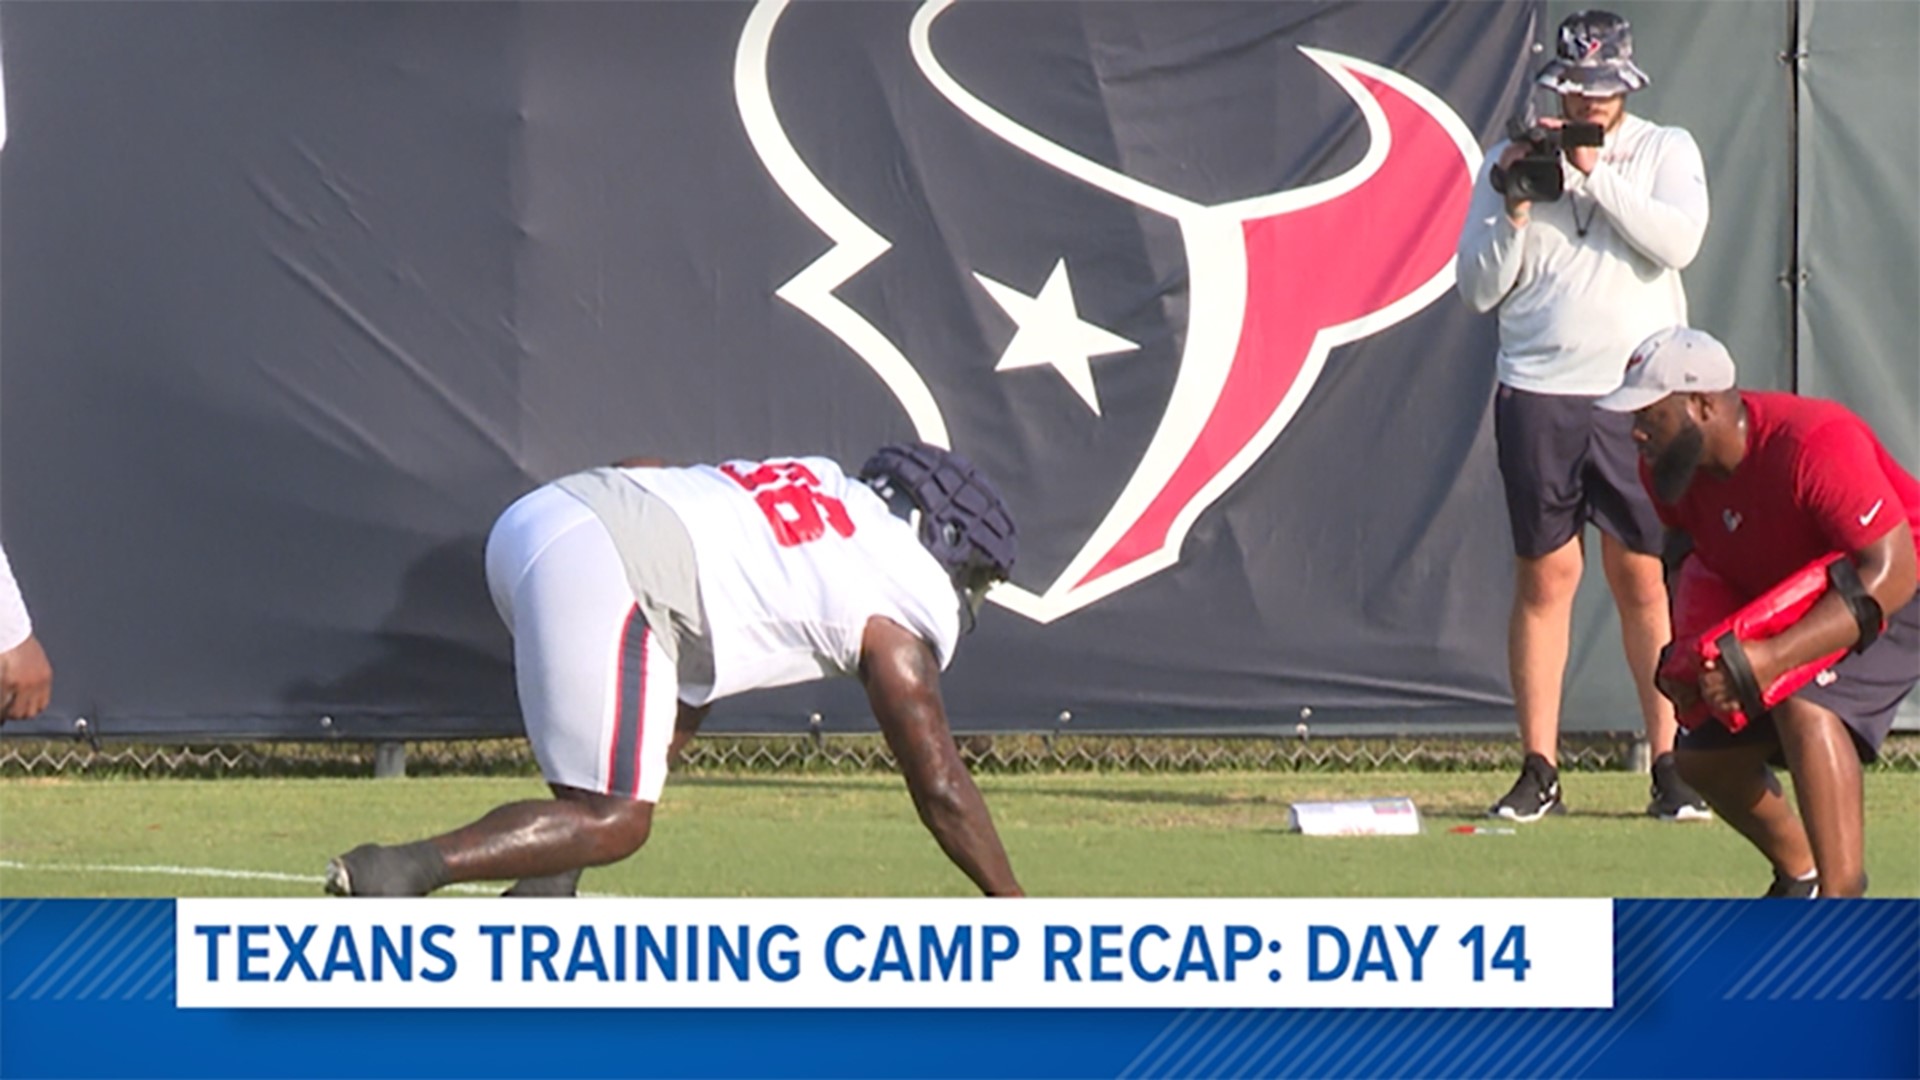 Houston Texans Coach Lovie Smith said the play from the defensive line has been impressive so far in training camp and two preseason games.